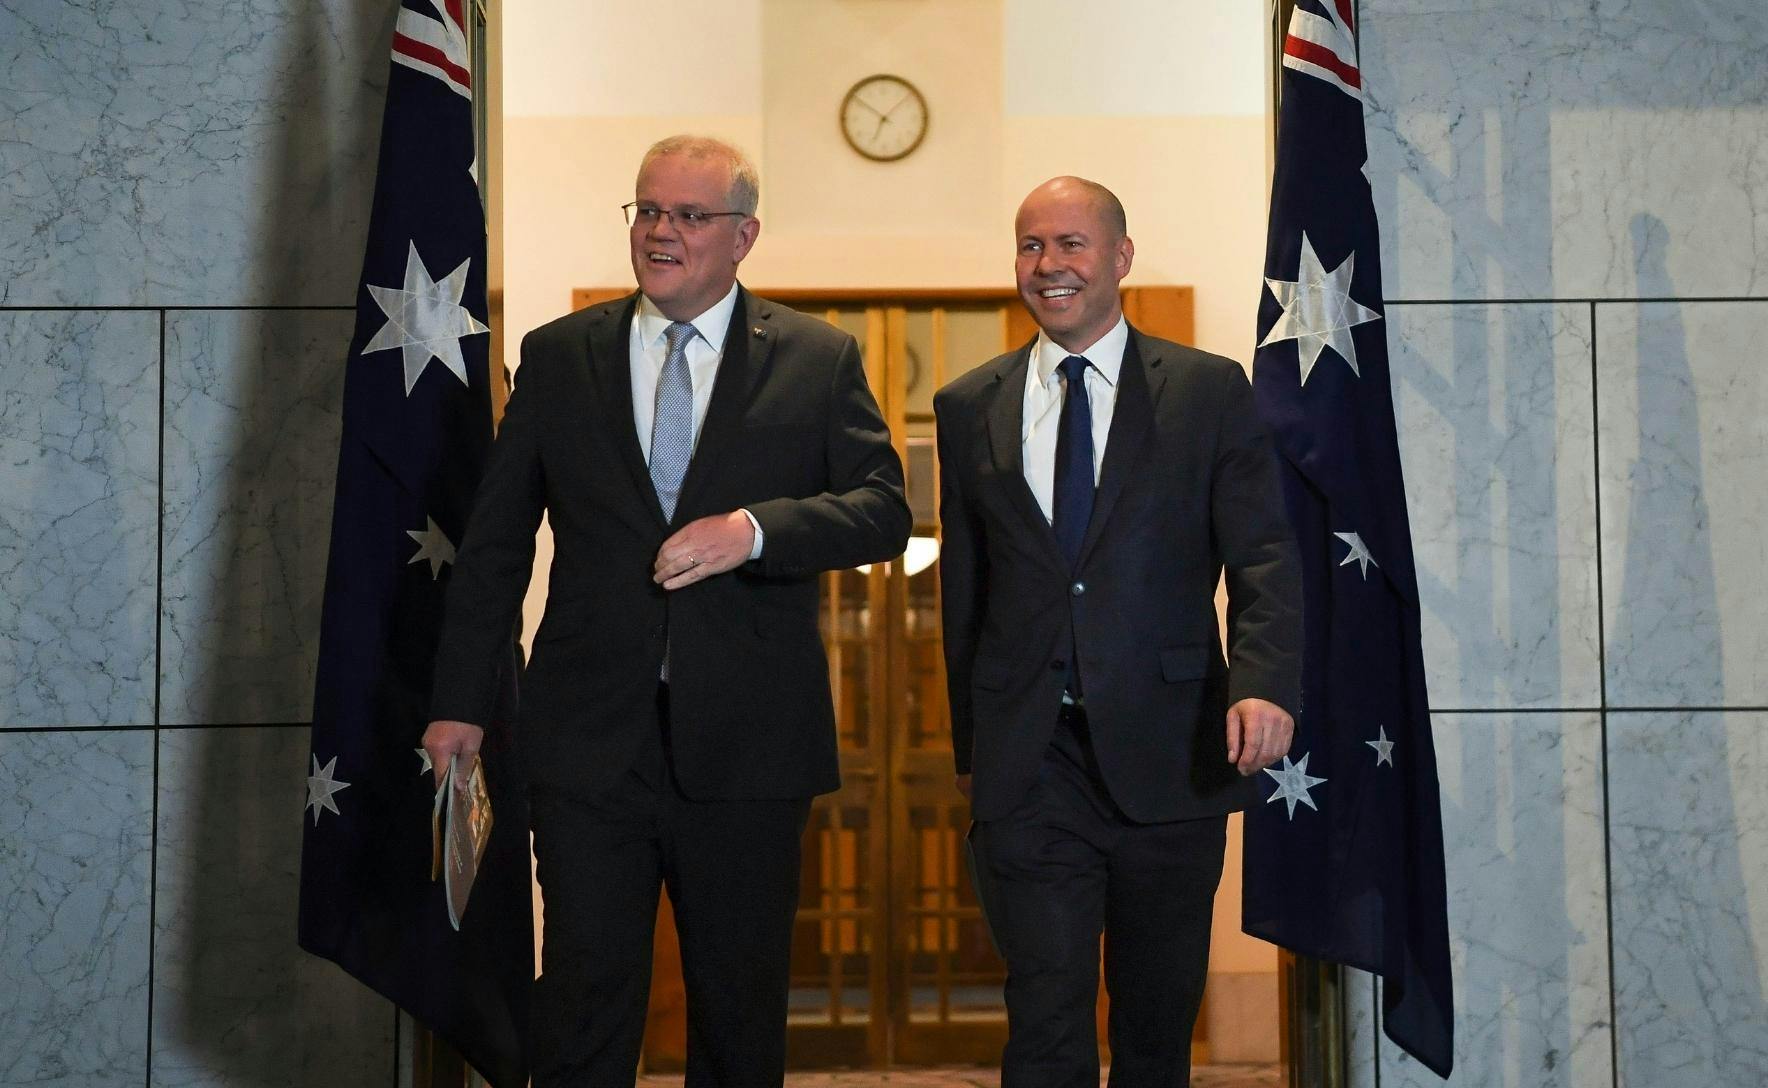 Scott Morrison and Josh Frydenburg wearing black suits. The are smiling and walking out of a room. Two Australian Flags are hung behind them.